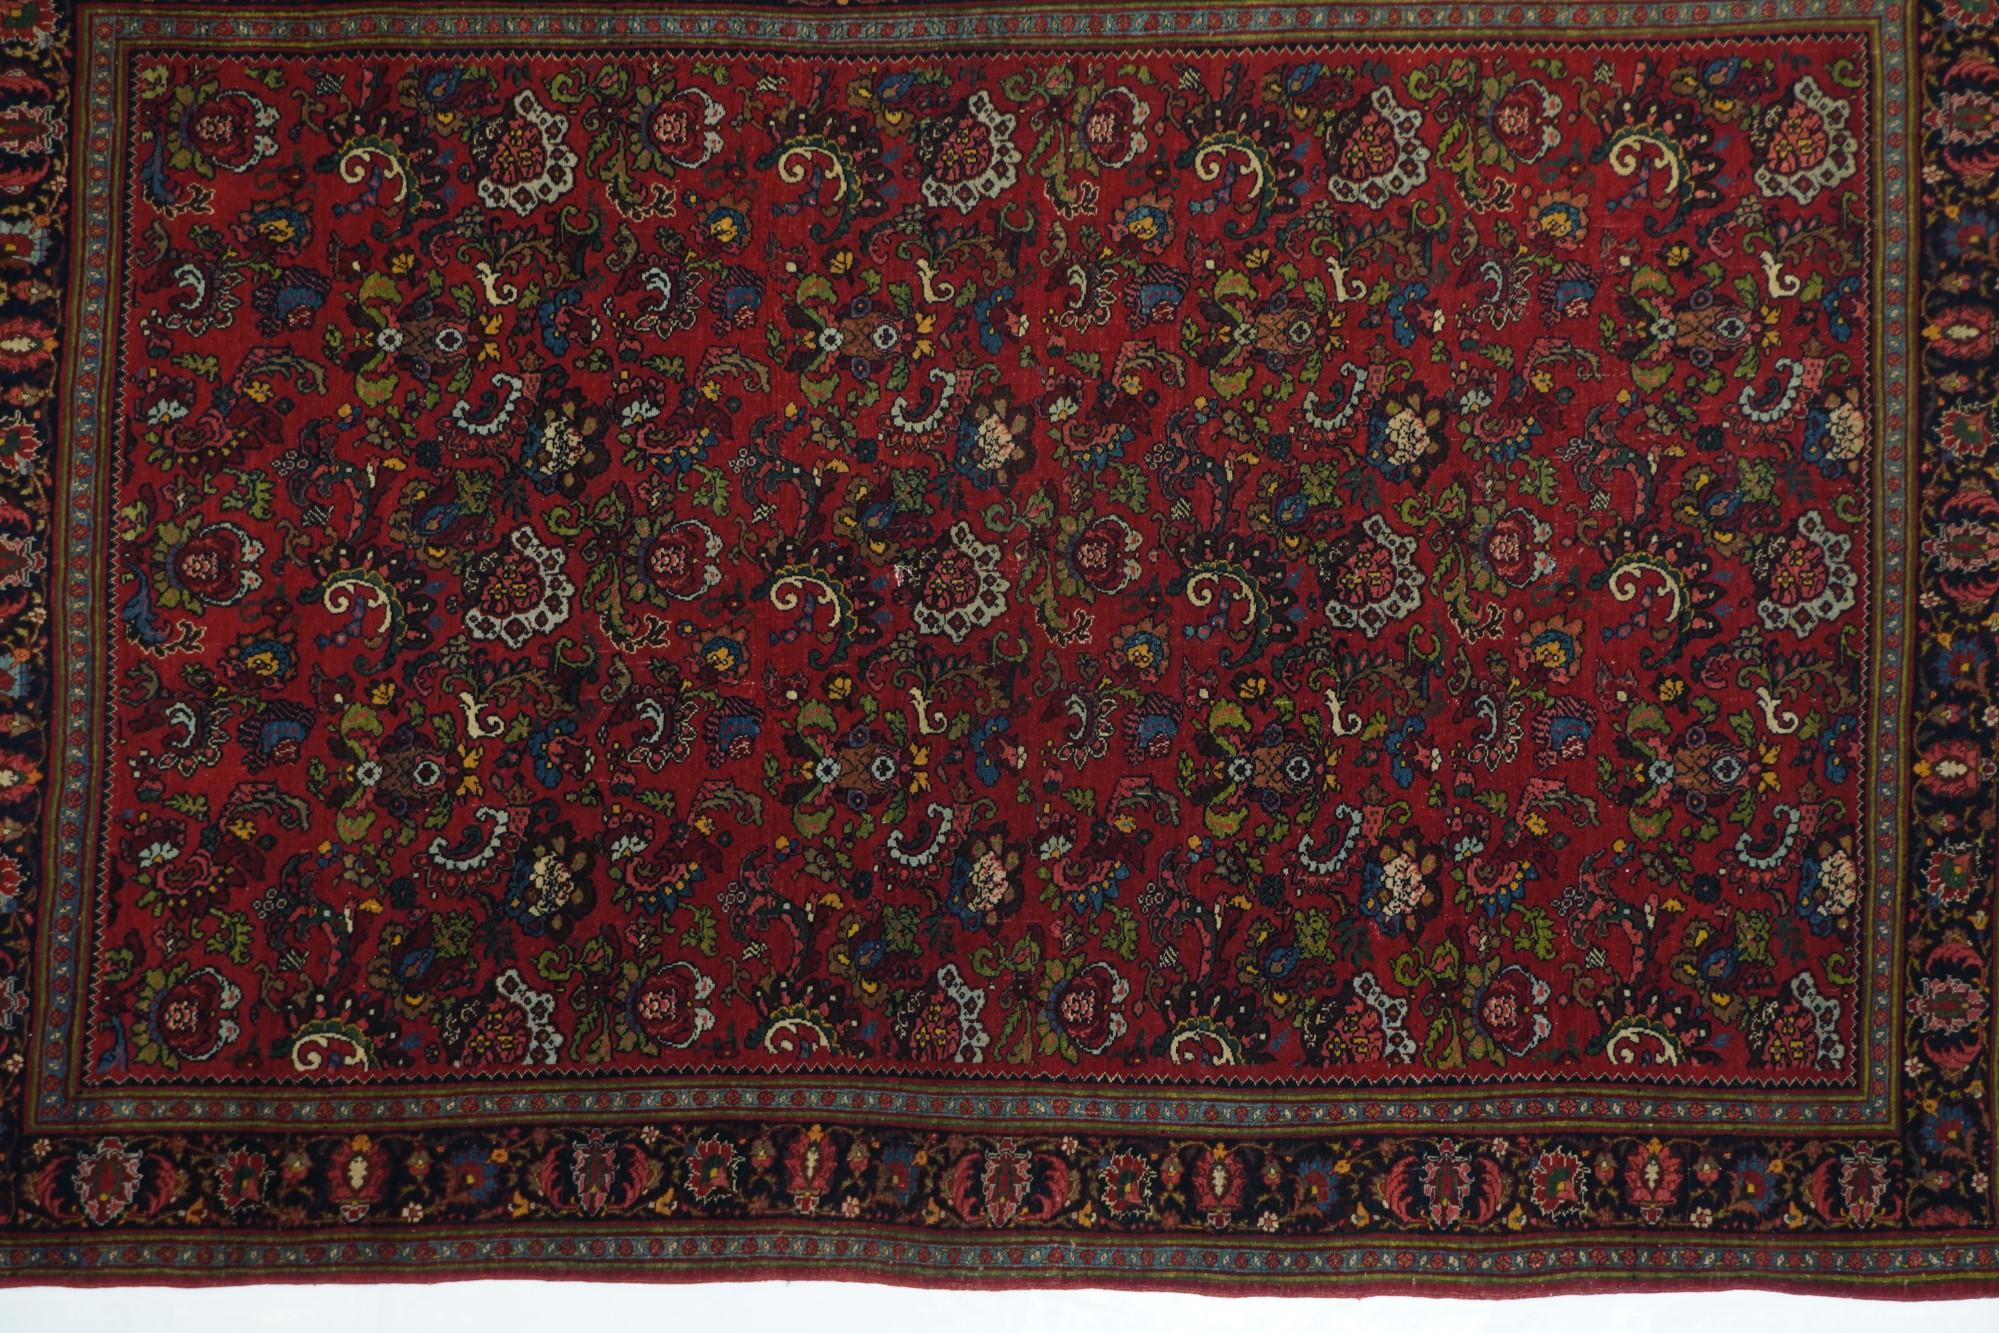 Extreamly Fine Antique Persian Halvai Bijar Rug 4'7'' x 7'0'' In Excellent Condition For Sale In New York, NY